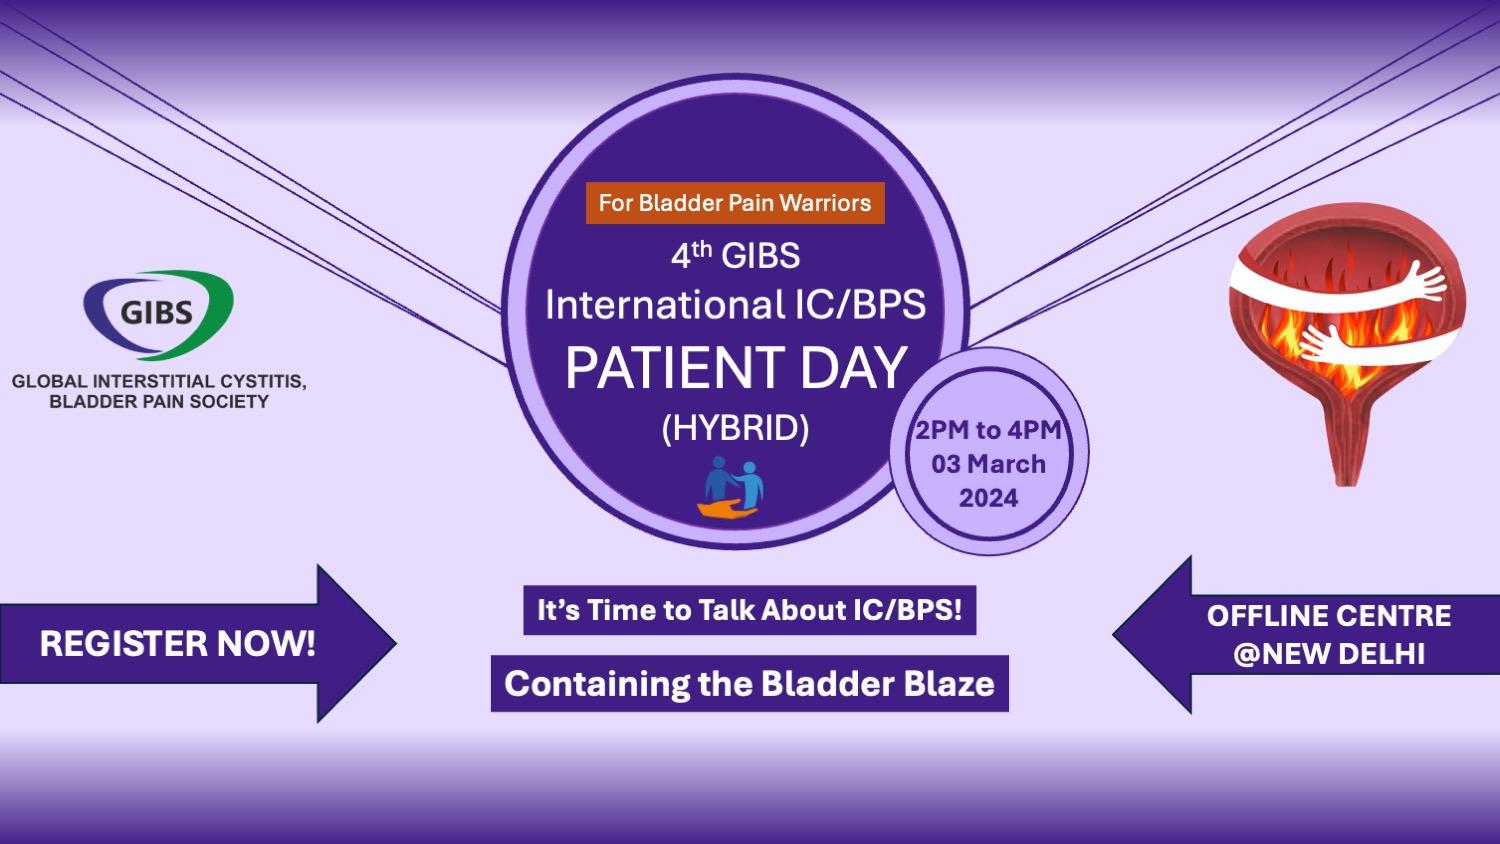 4th GIBS International IC/BPS Patient Day